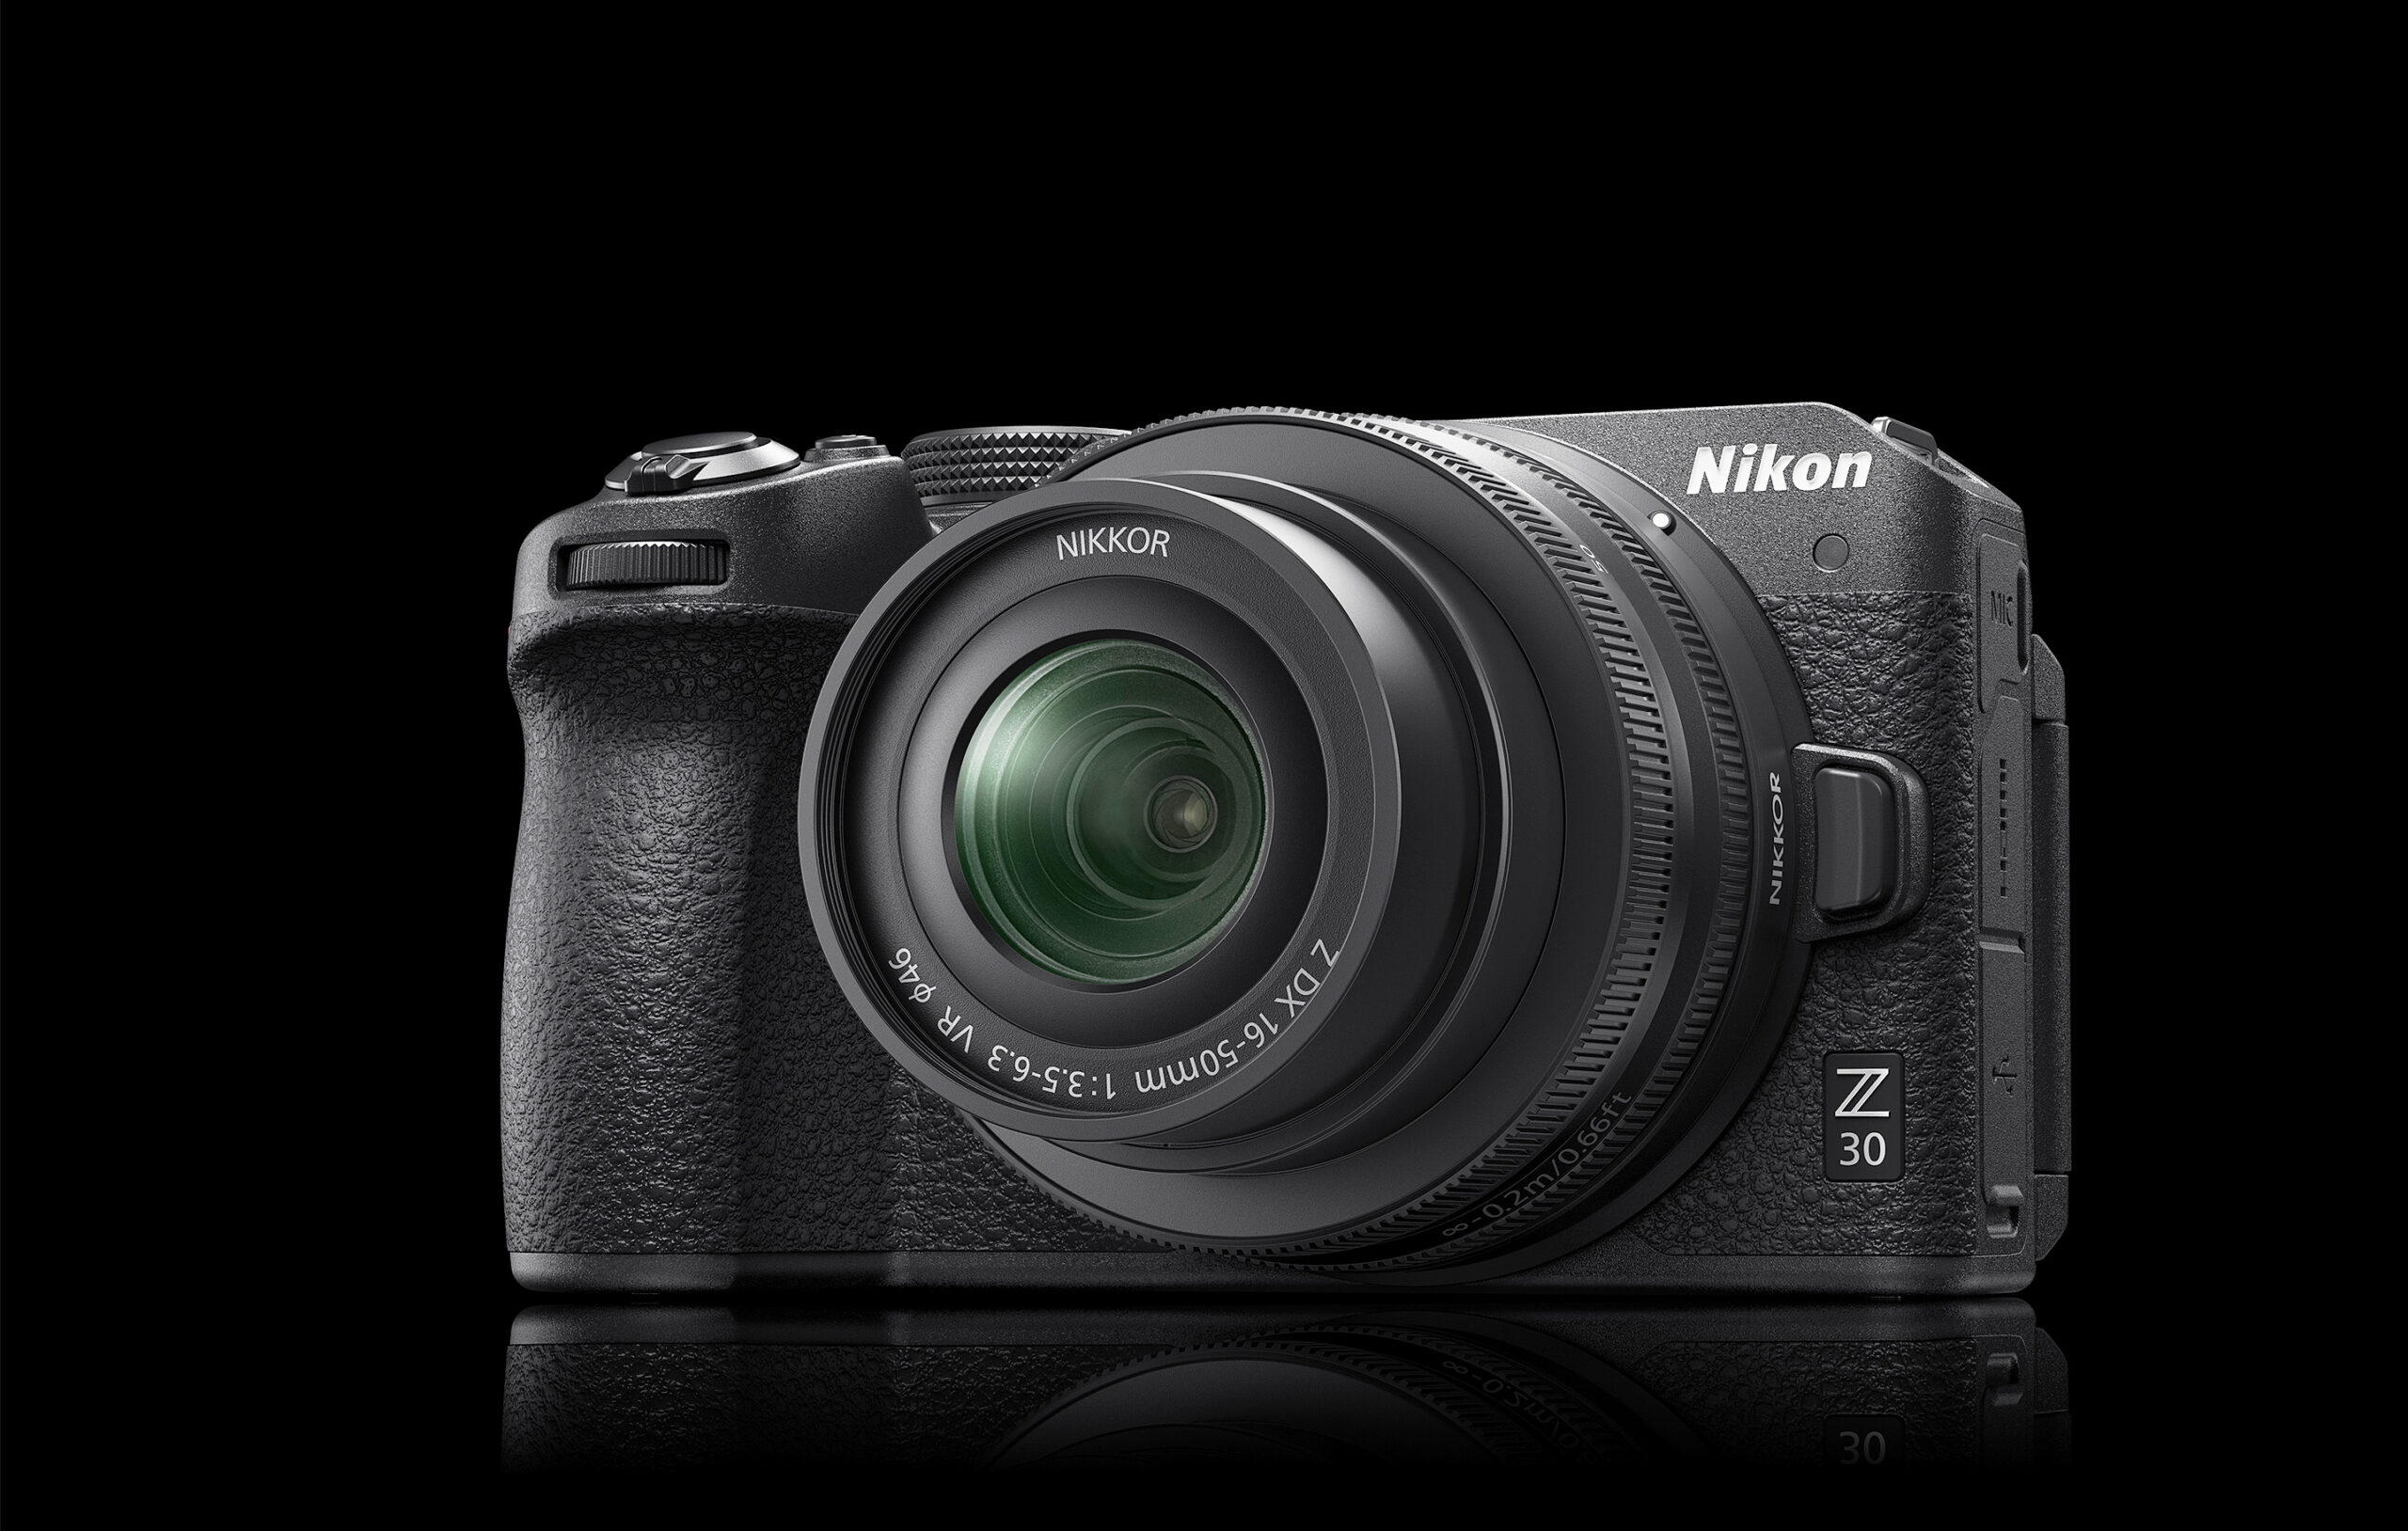 New gear: The Nikon Z30 shoots 4K for less | Popular Photography